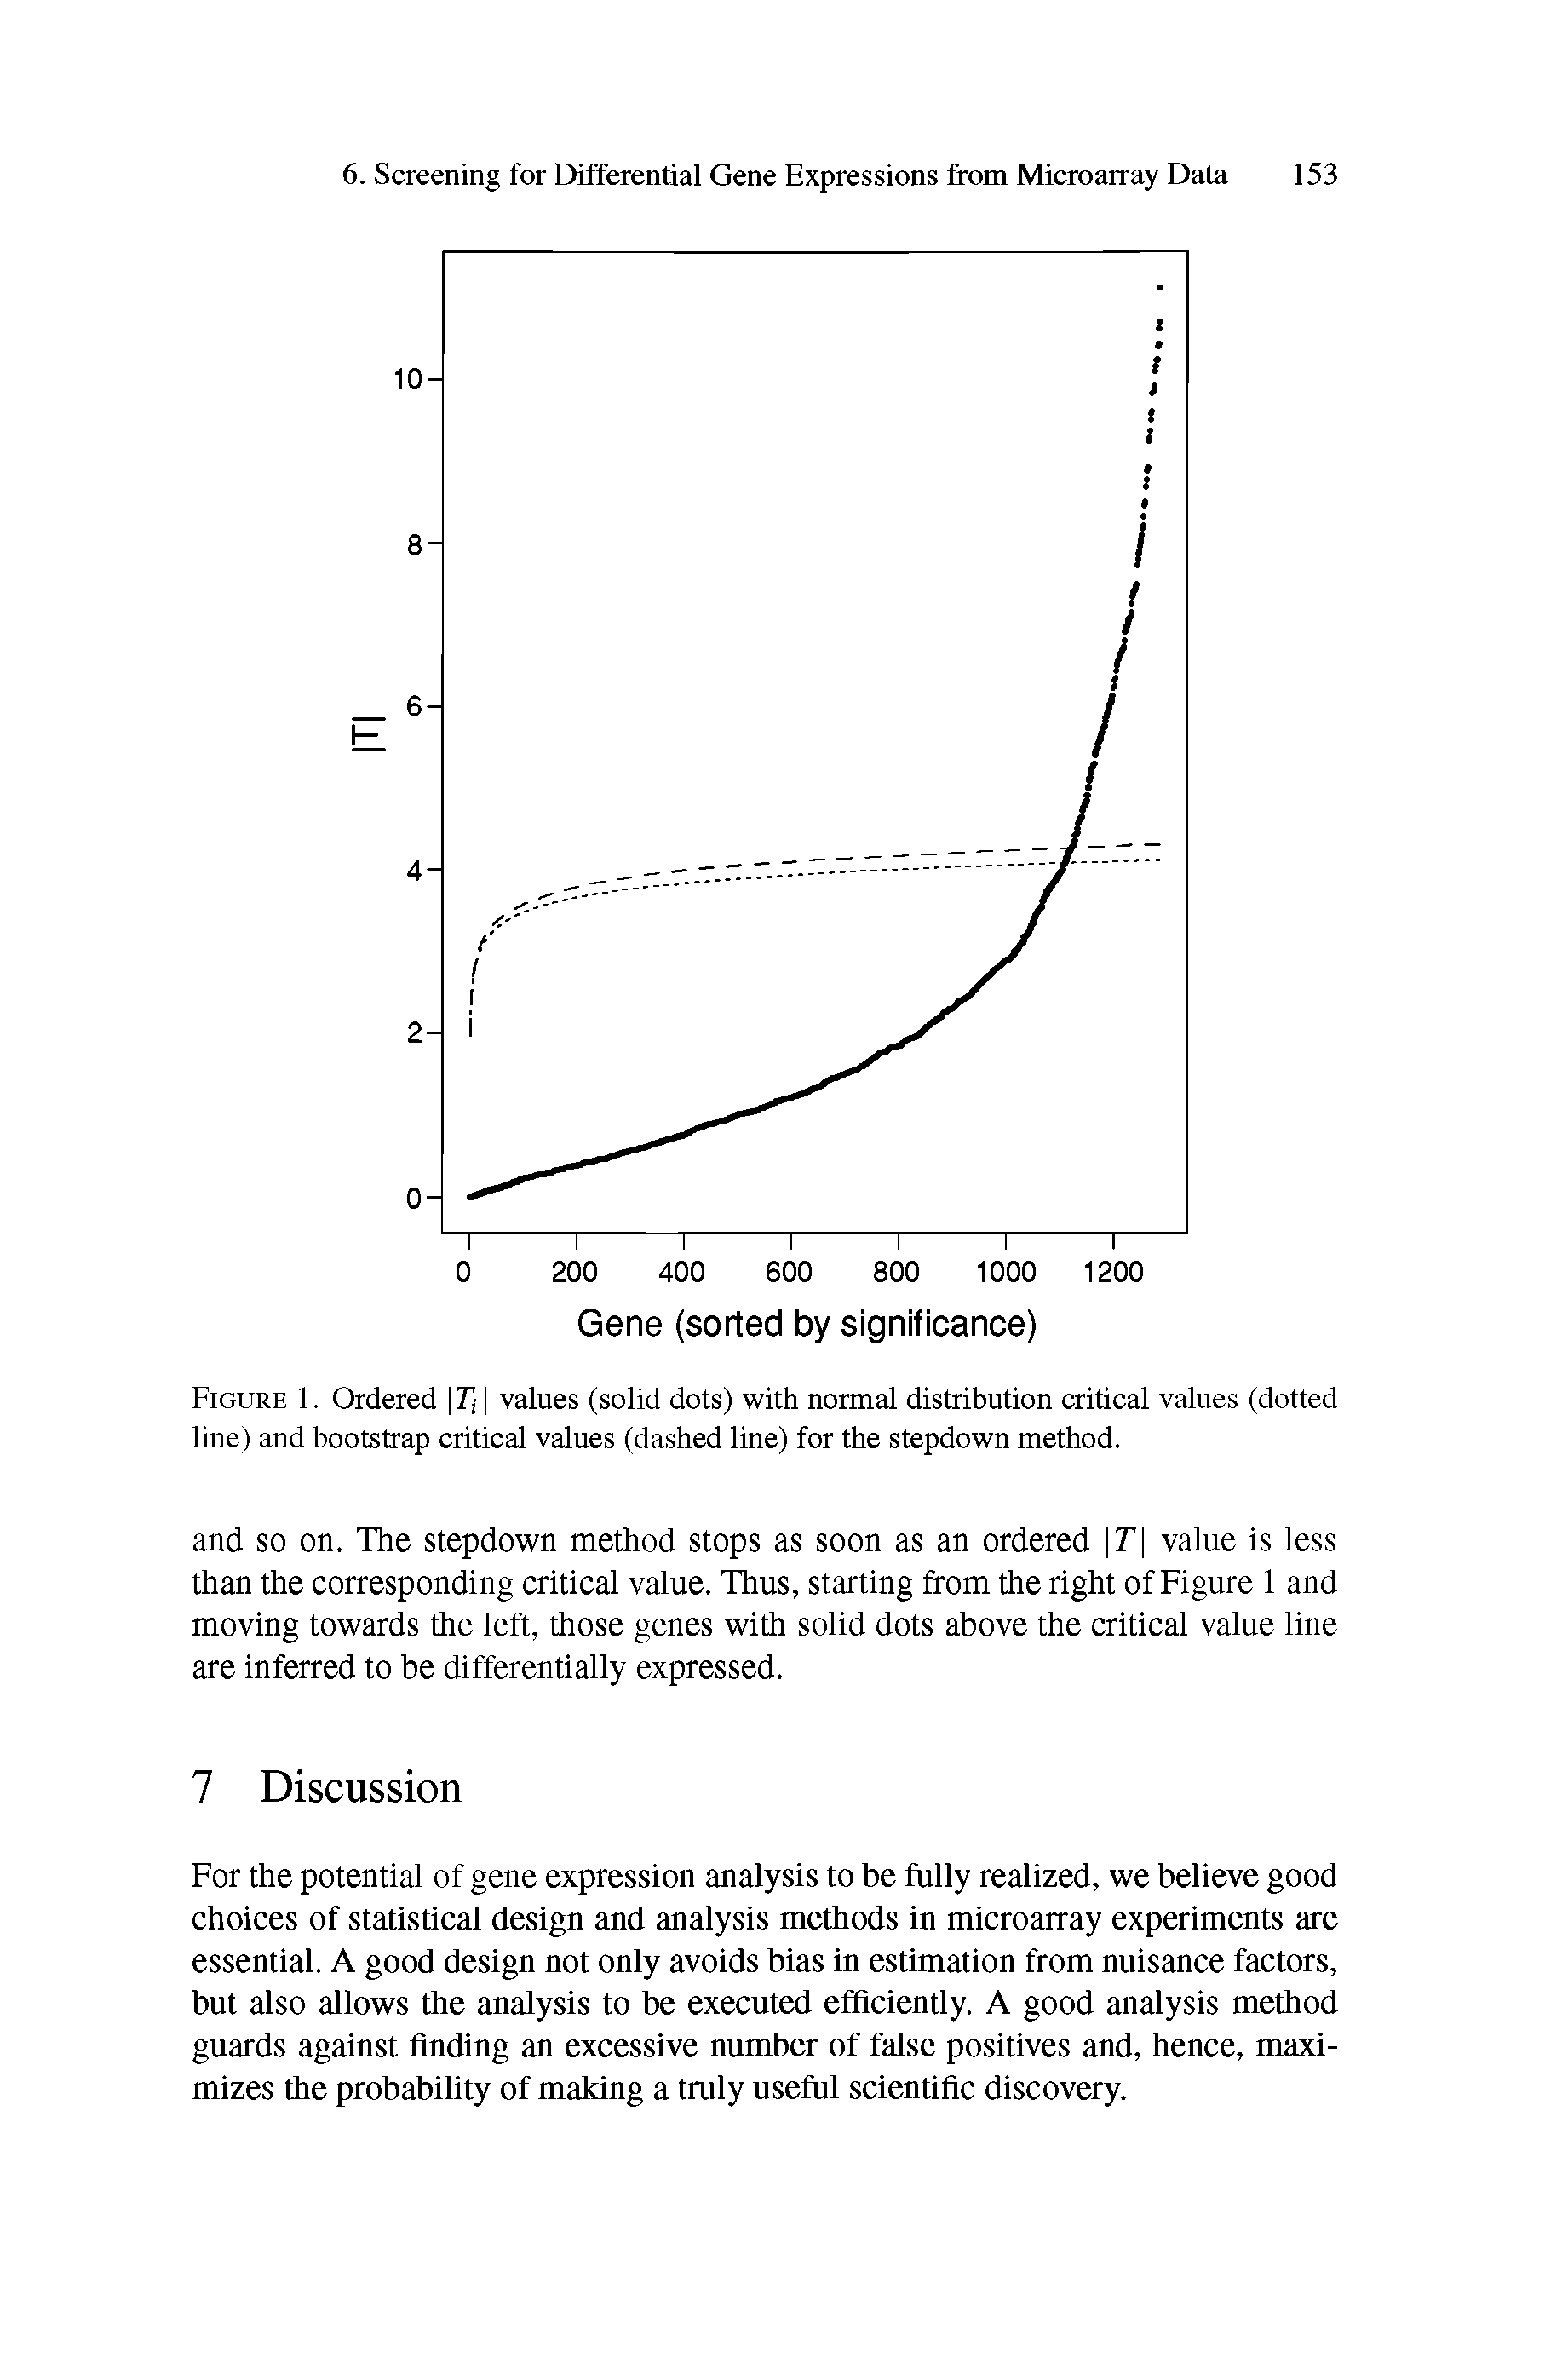 Figure 1. Ordered 7] values (solid dots) with normal distribution critical values (dotted line) and bootstrap critical values (dashed line) for the stepdown method.